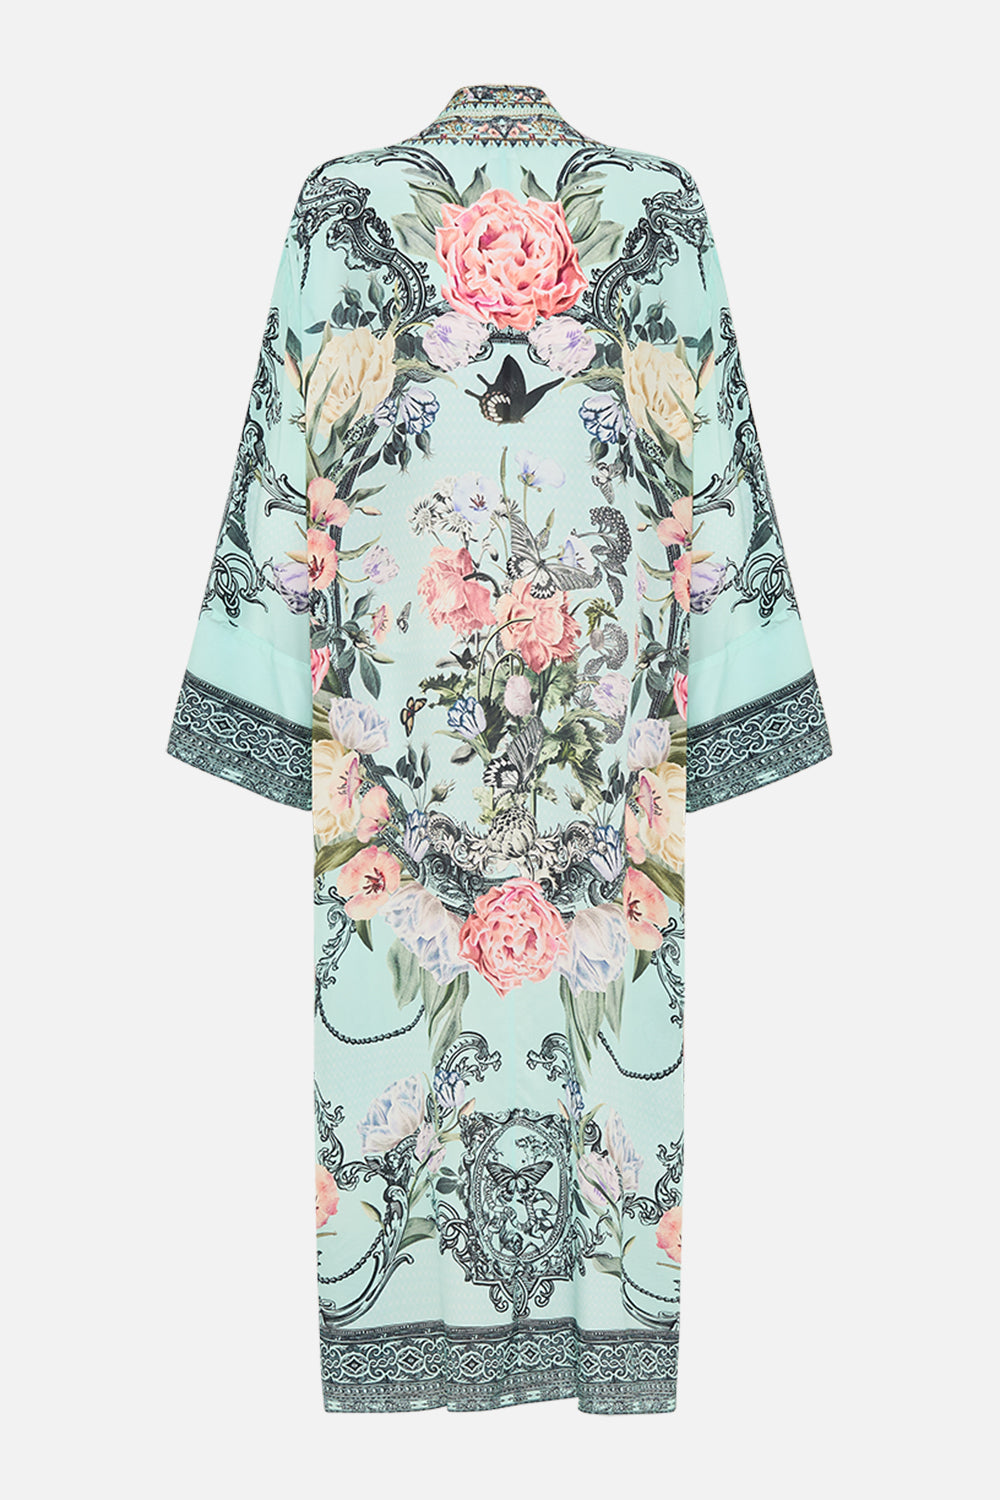 CAMILLA Floral Long Layer with Neckbands in Petal Promise Land